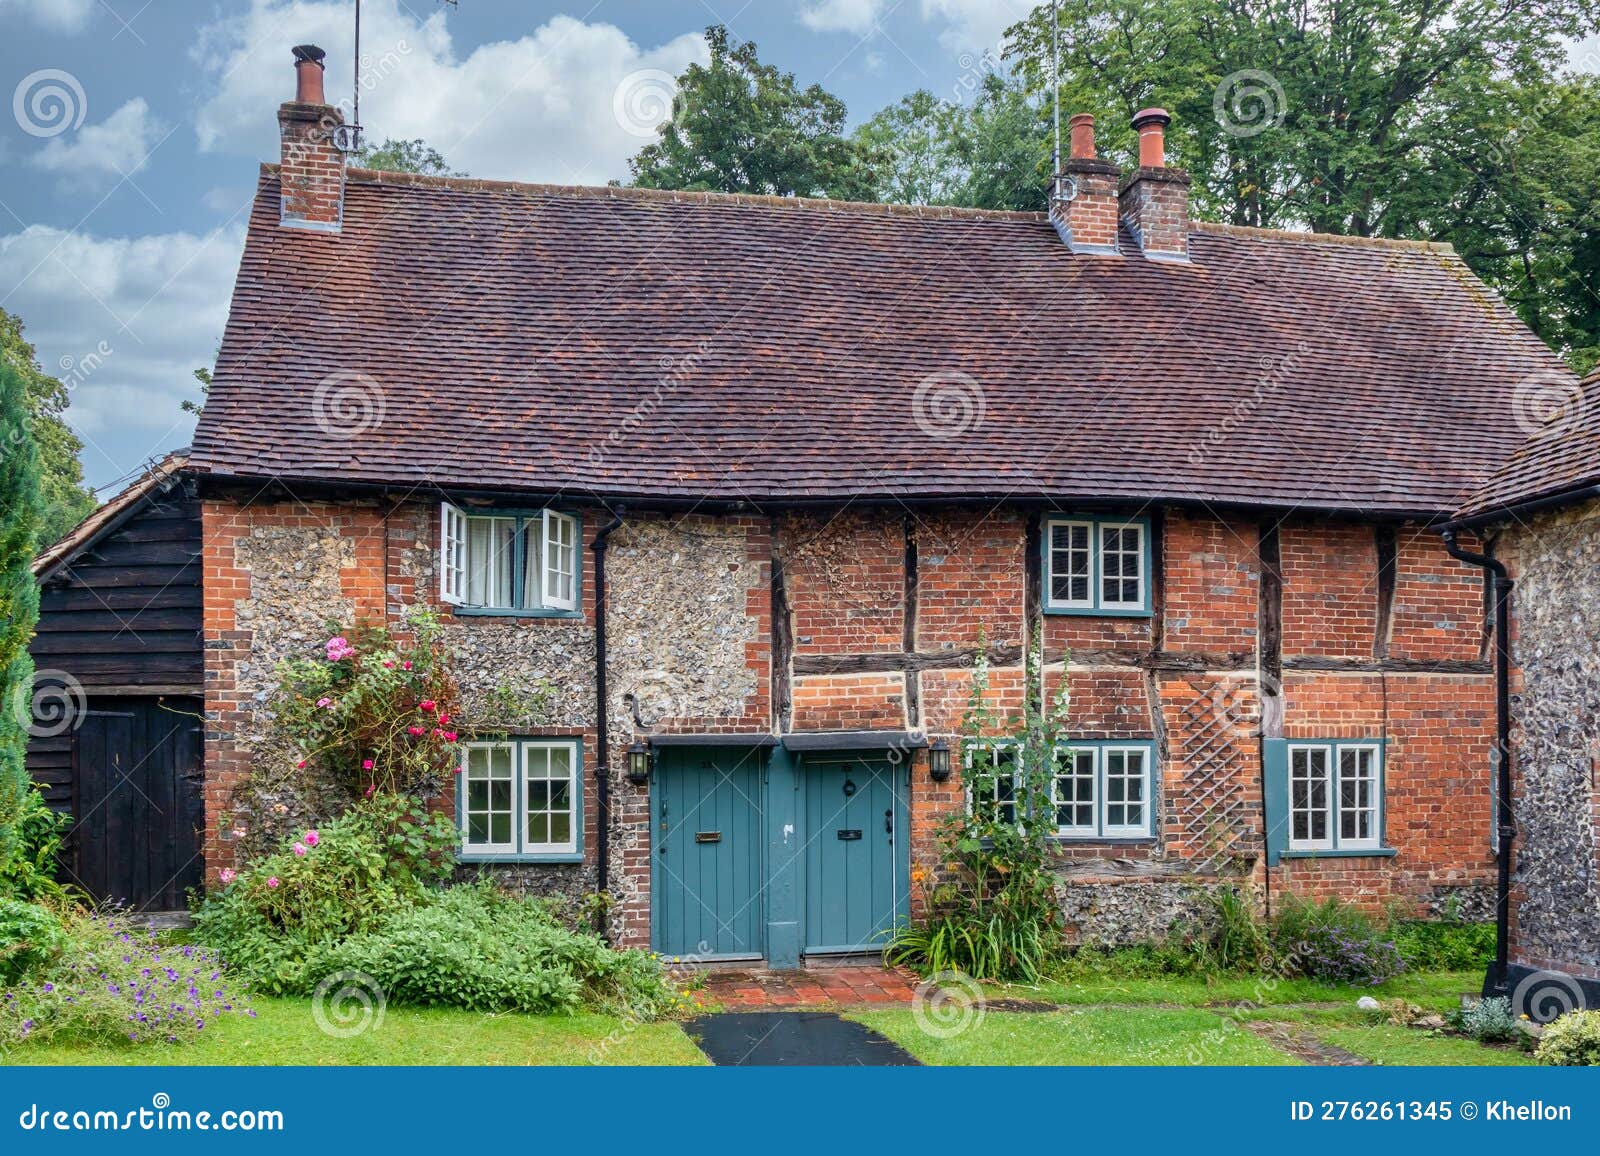 english country cottages in west wycombe,